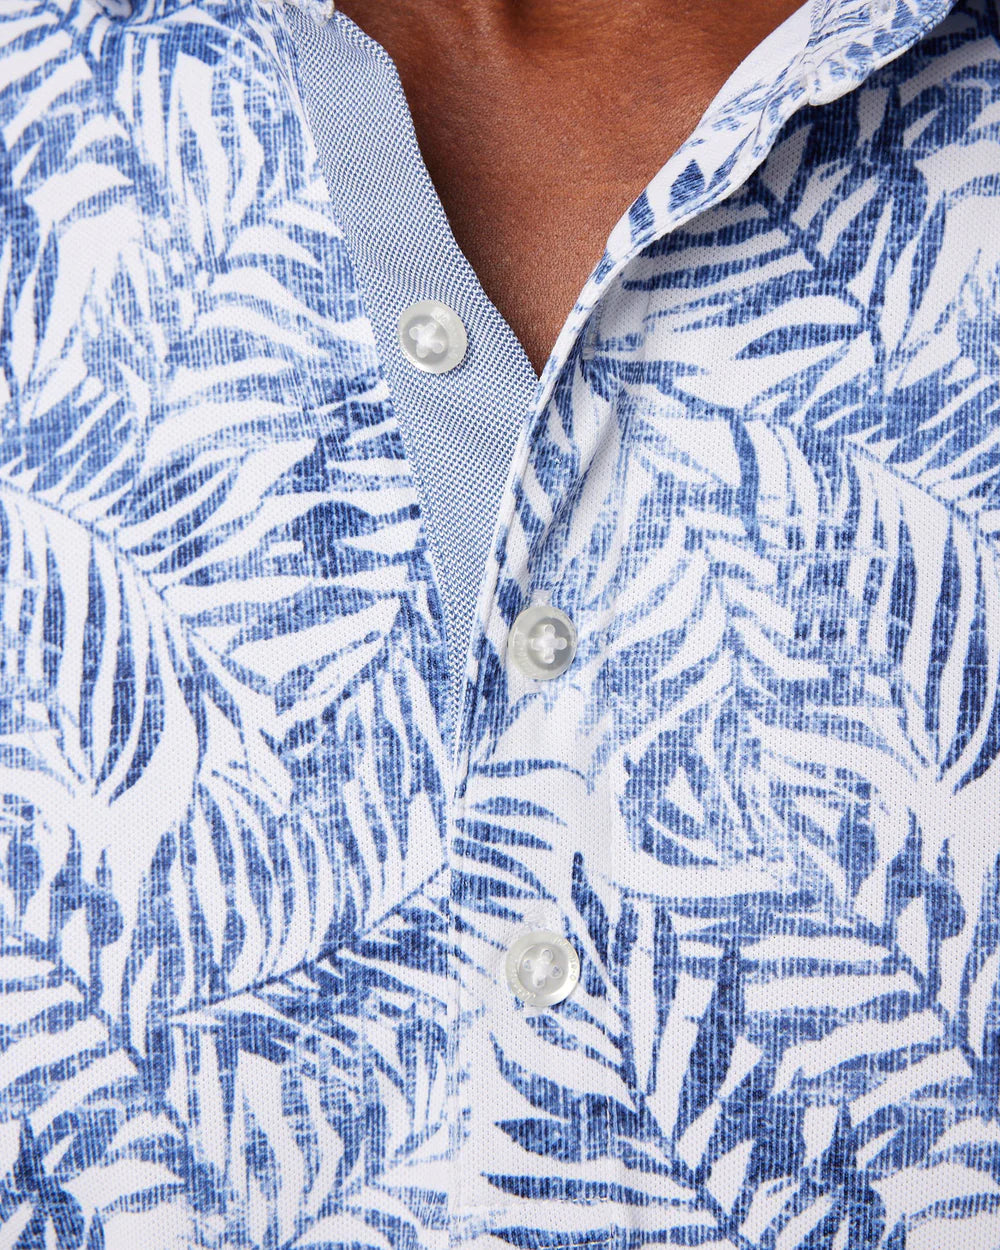 Planning a warm-weather getaway? Pack this tropical printed polo. Made with our signature performance mesh fabric, the Aiken will keep you cool and comfortable on and off the course. A chill floral print that looks sharp in the sun.